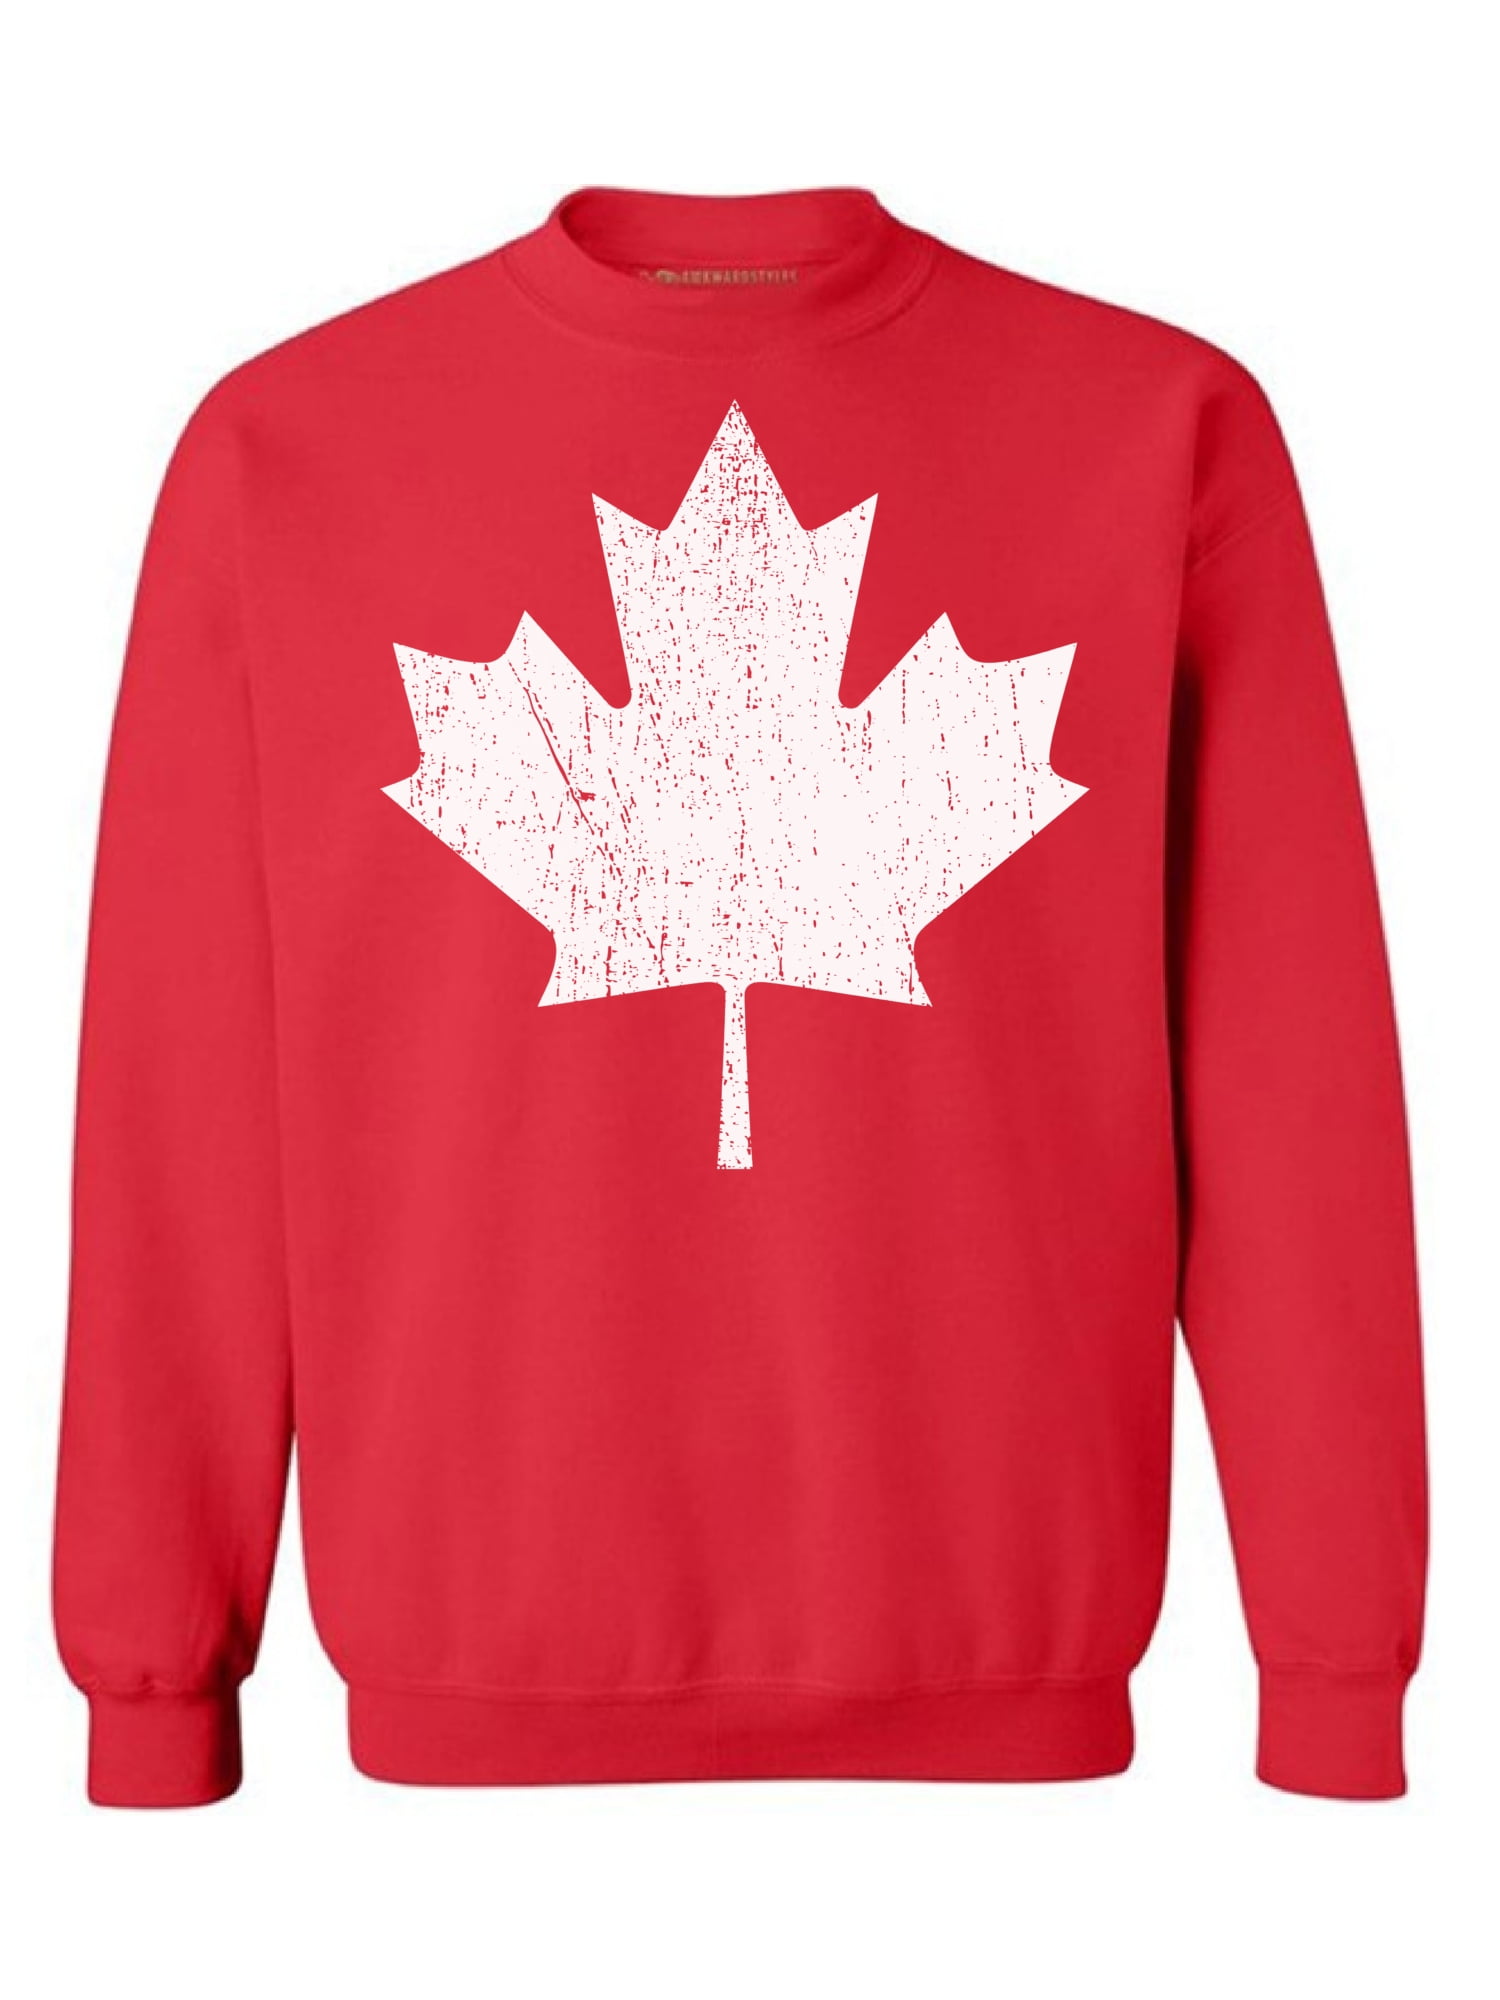 Canada Knitwear Canada Knit Hoodie for Men and Women Canadian Maple Leaf Pullover Hooded Sweatshirt